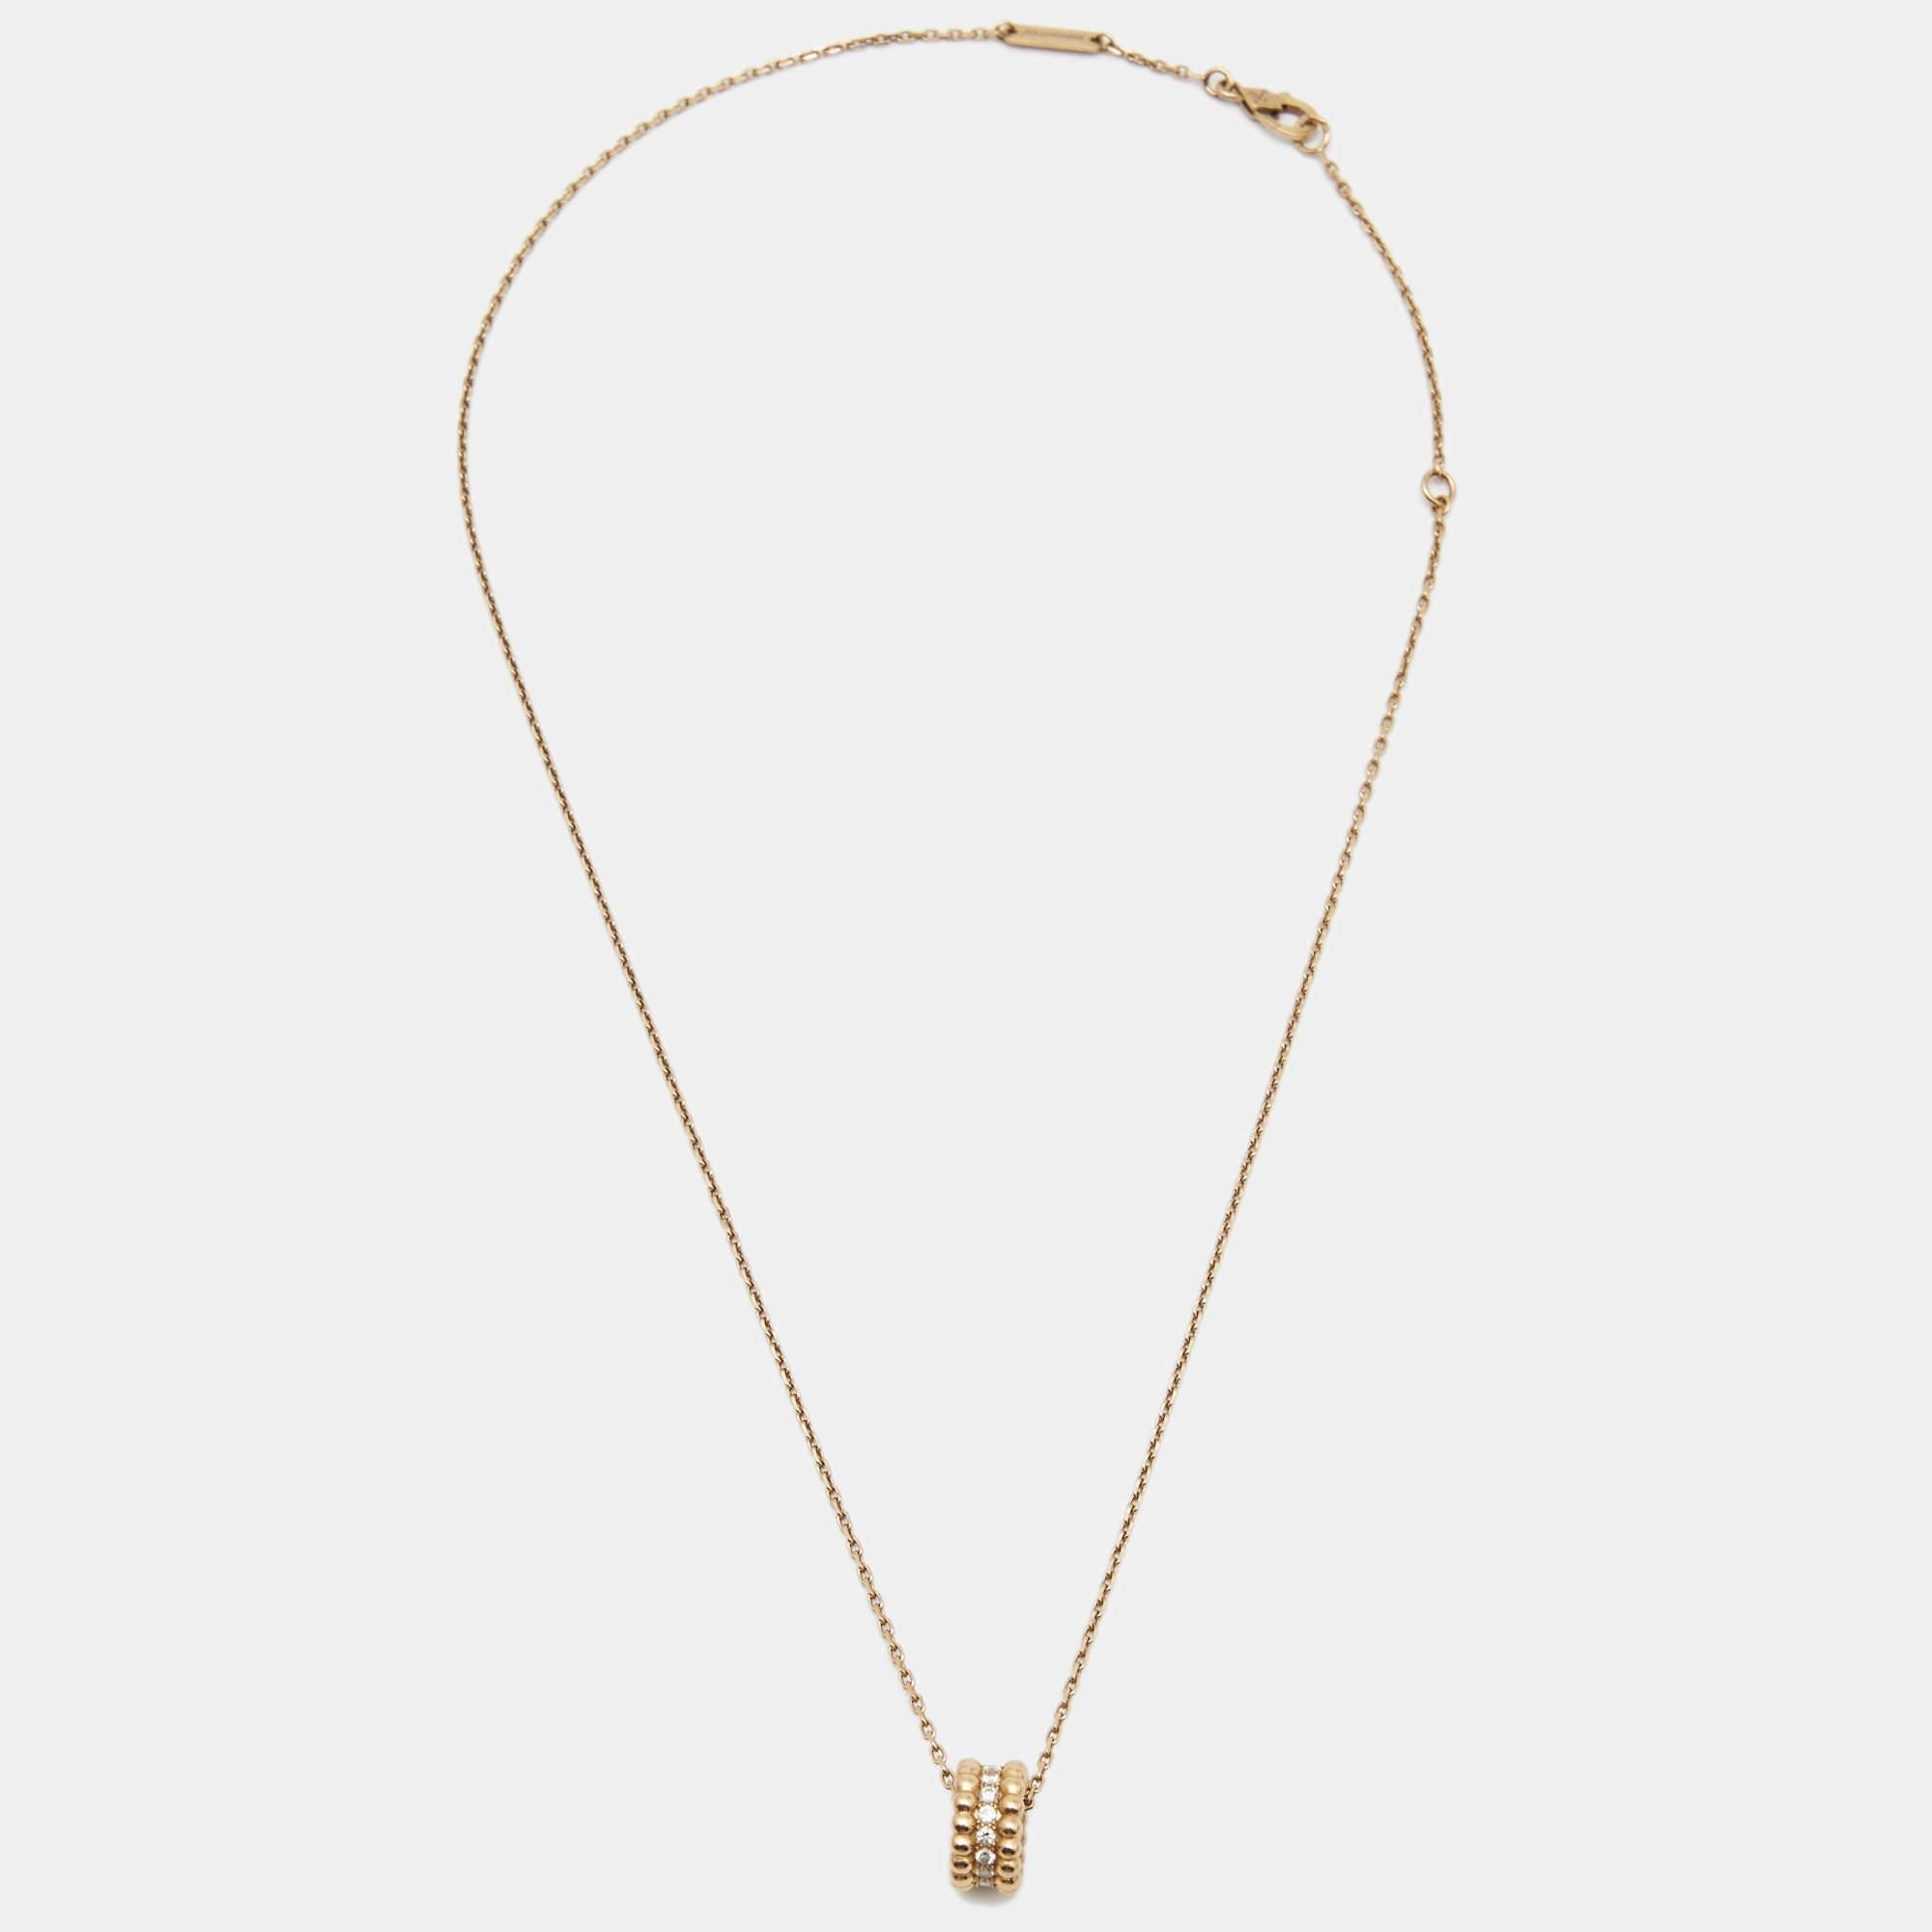 The fine workmanship, use of precious metals, and unique appeal make this designer necklace for women a fabulous purchase. It's a worthy investment.

